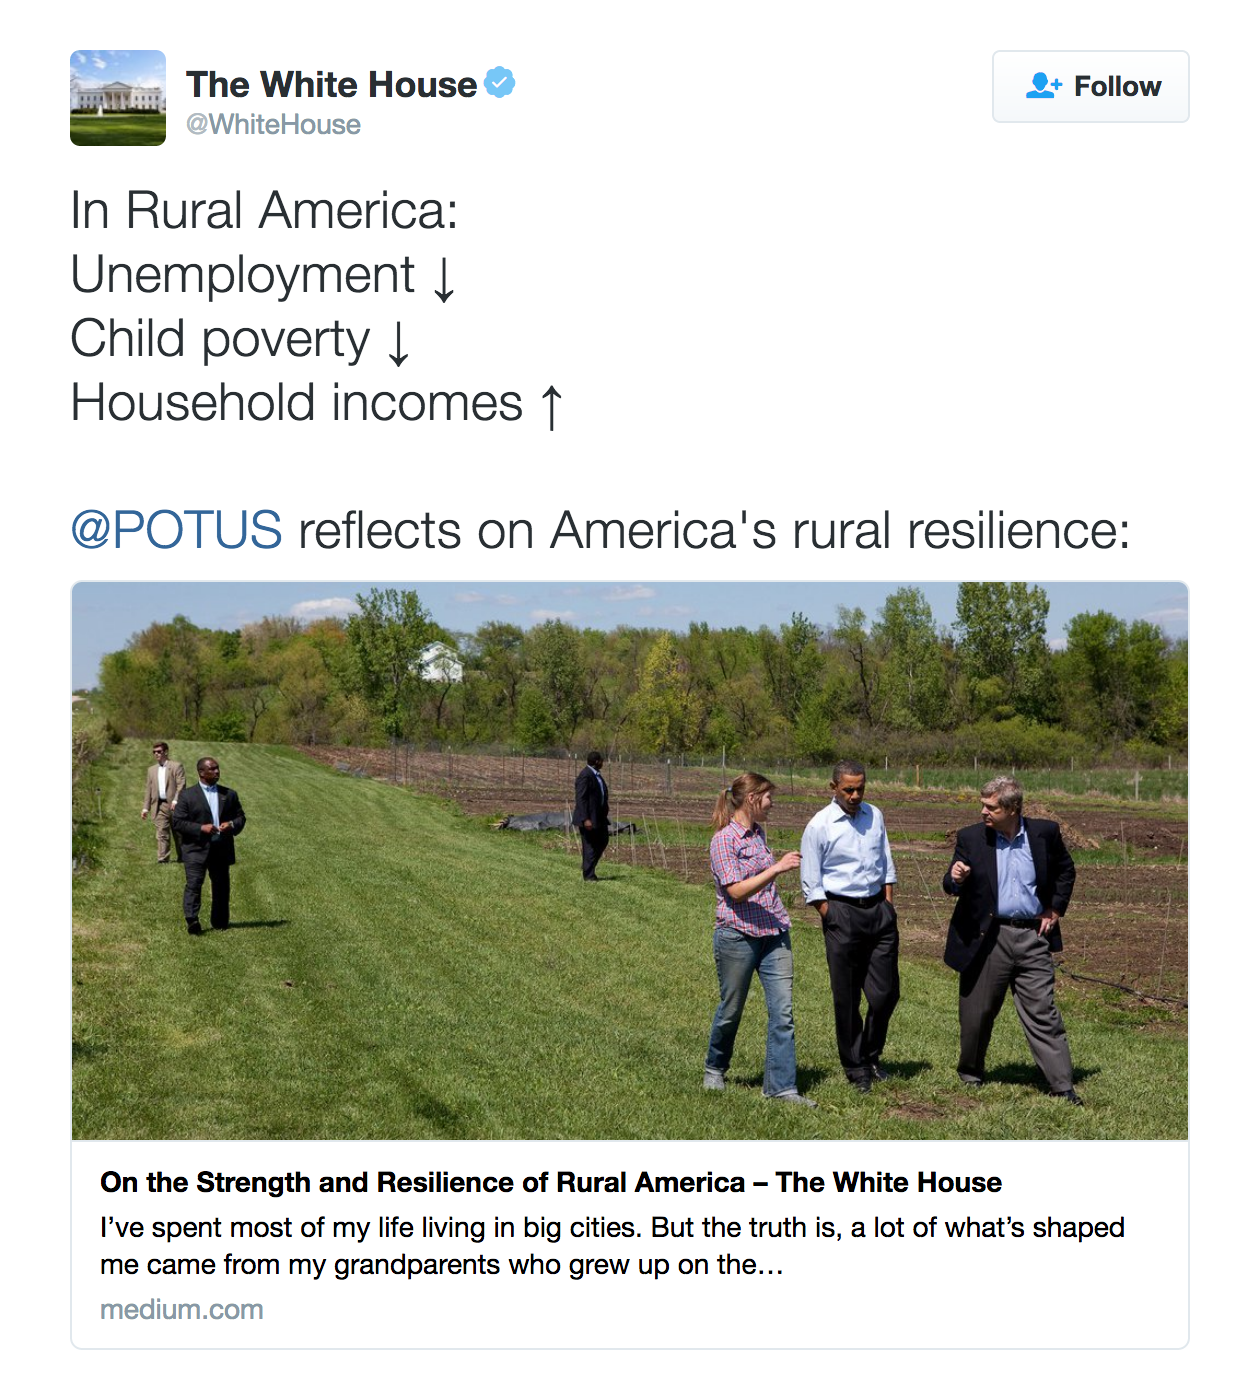 In Rural America: Unemployment ↓ Child poverty ↓ Household incomes ↑ @POTUS reflects on America's rural resilience: